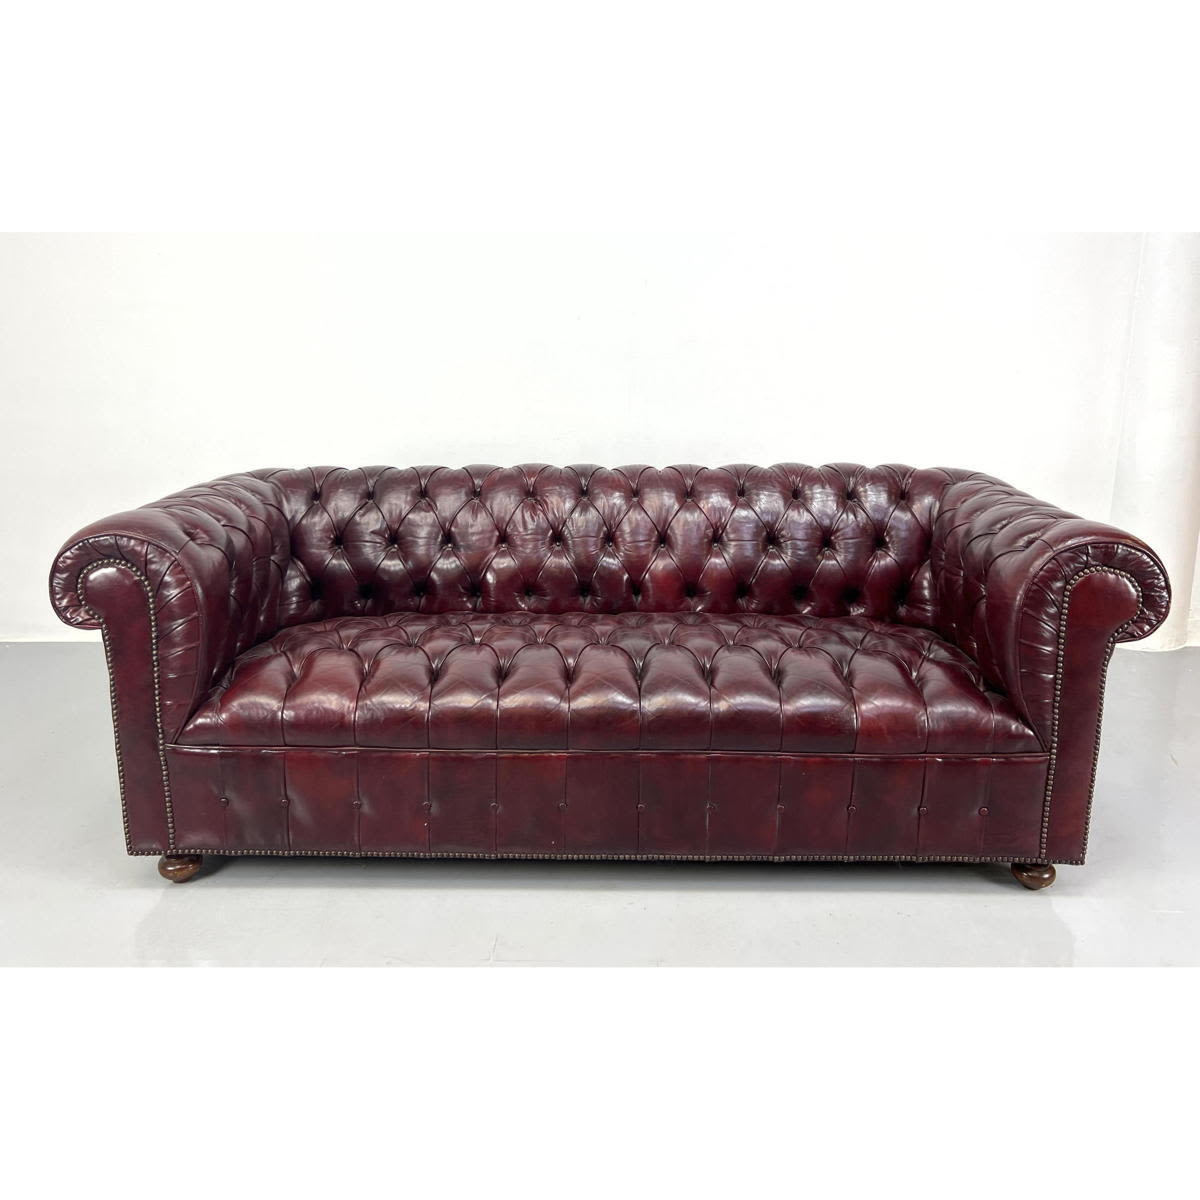 Large Chesterfield Sofa Couch  2a7812